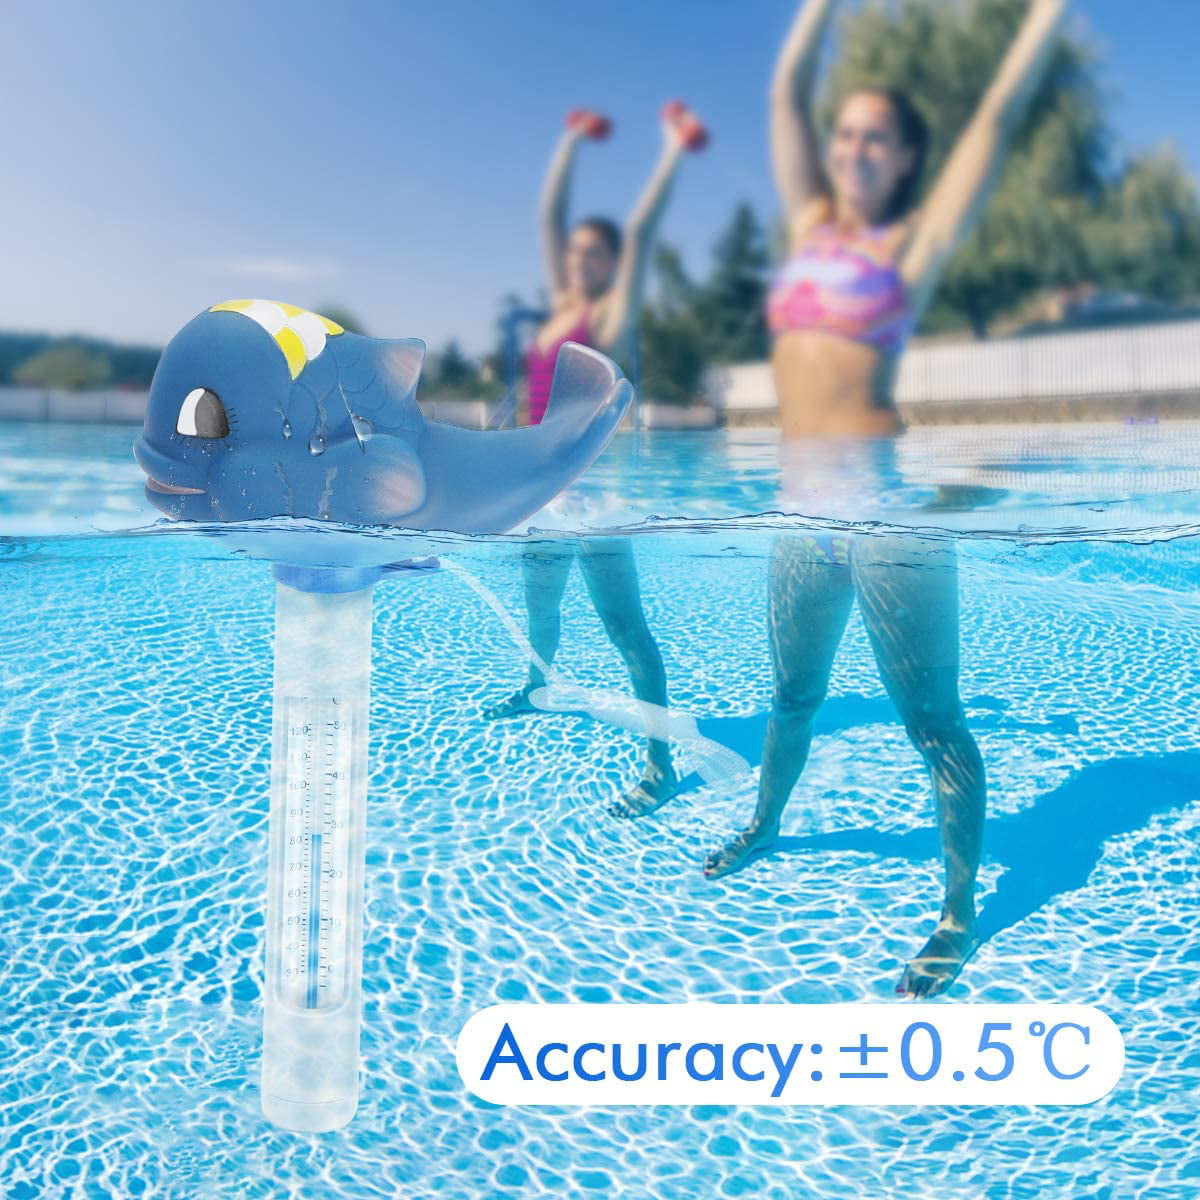 Floating Pool Thermometer Bath Water Jacuzzis & Aquariums Swimming Pool Thermometer with Rope Cartoon Style Water Thermometer for Outdoor/Indoor Swimming Pools Spas Hot Tubs